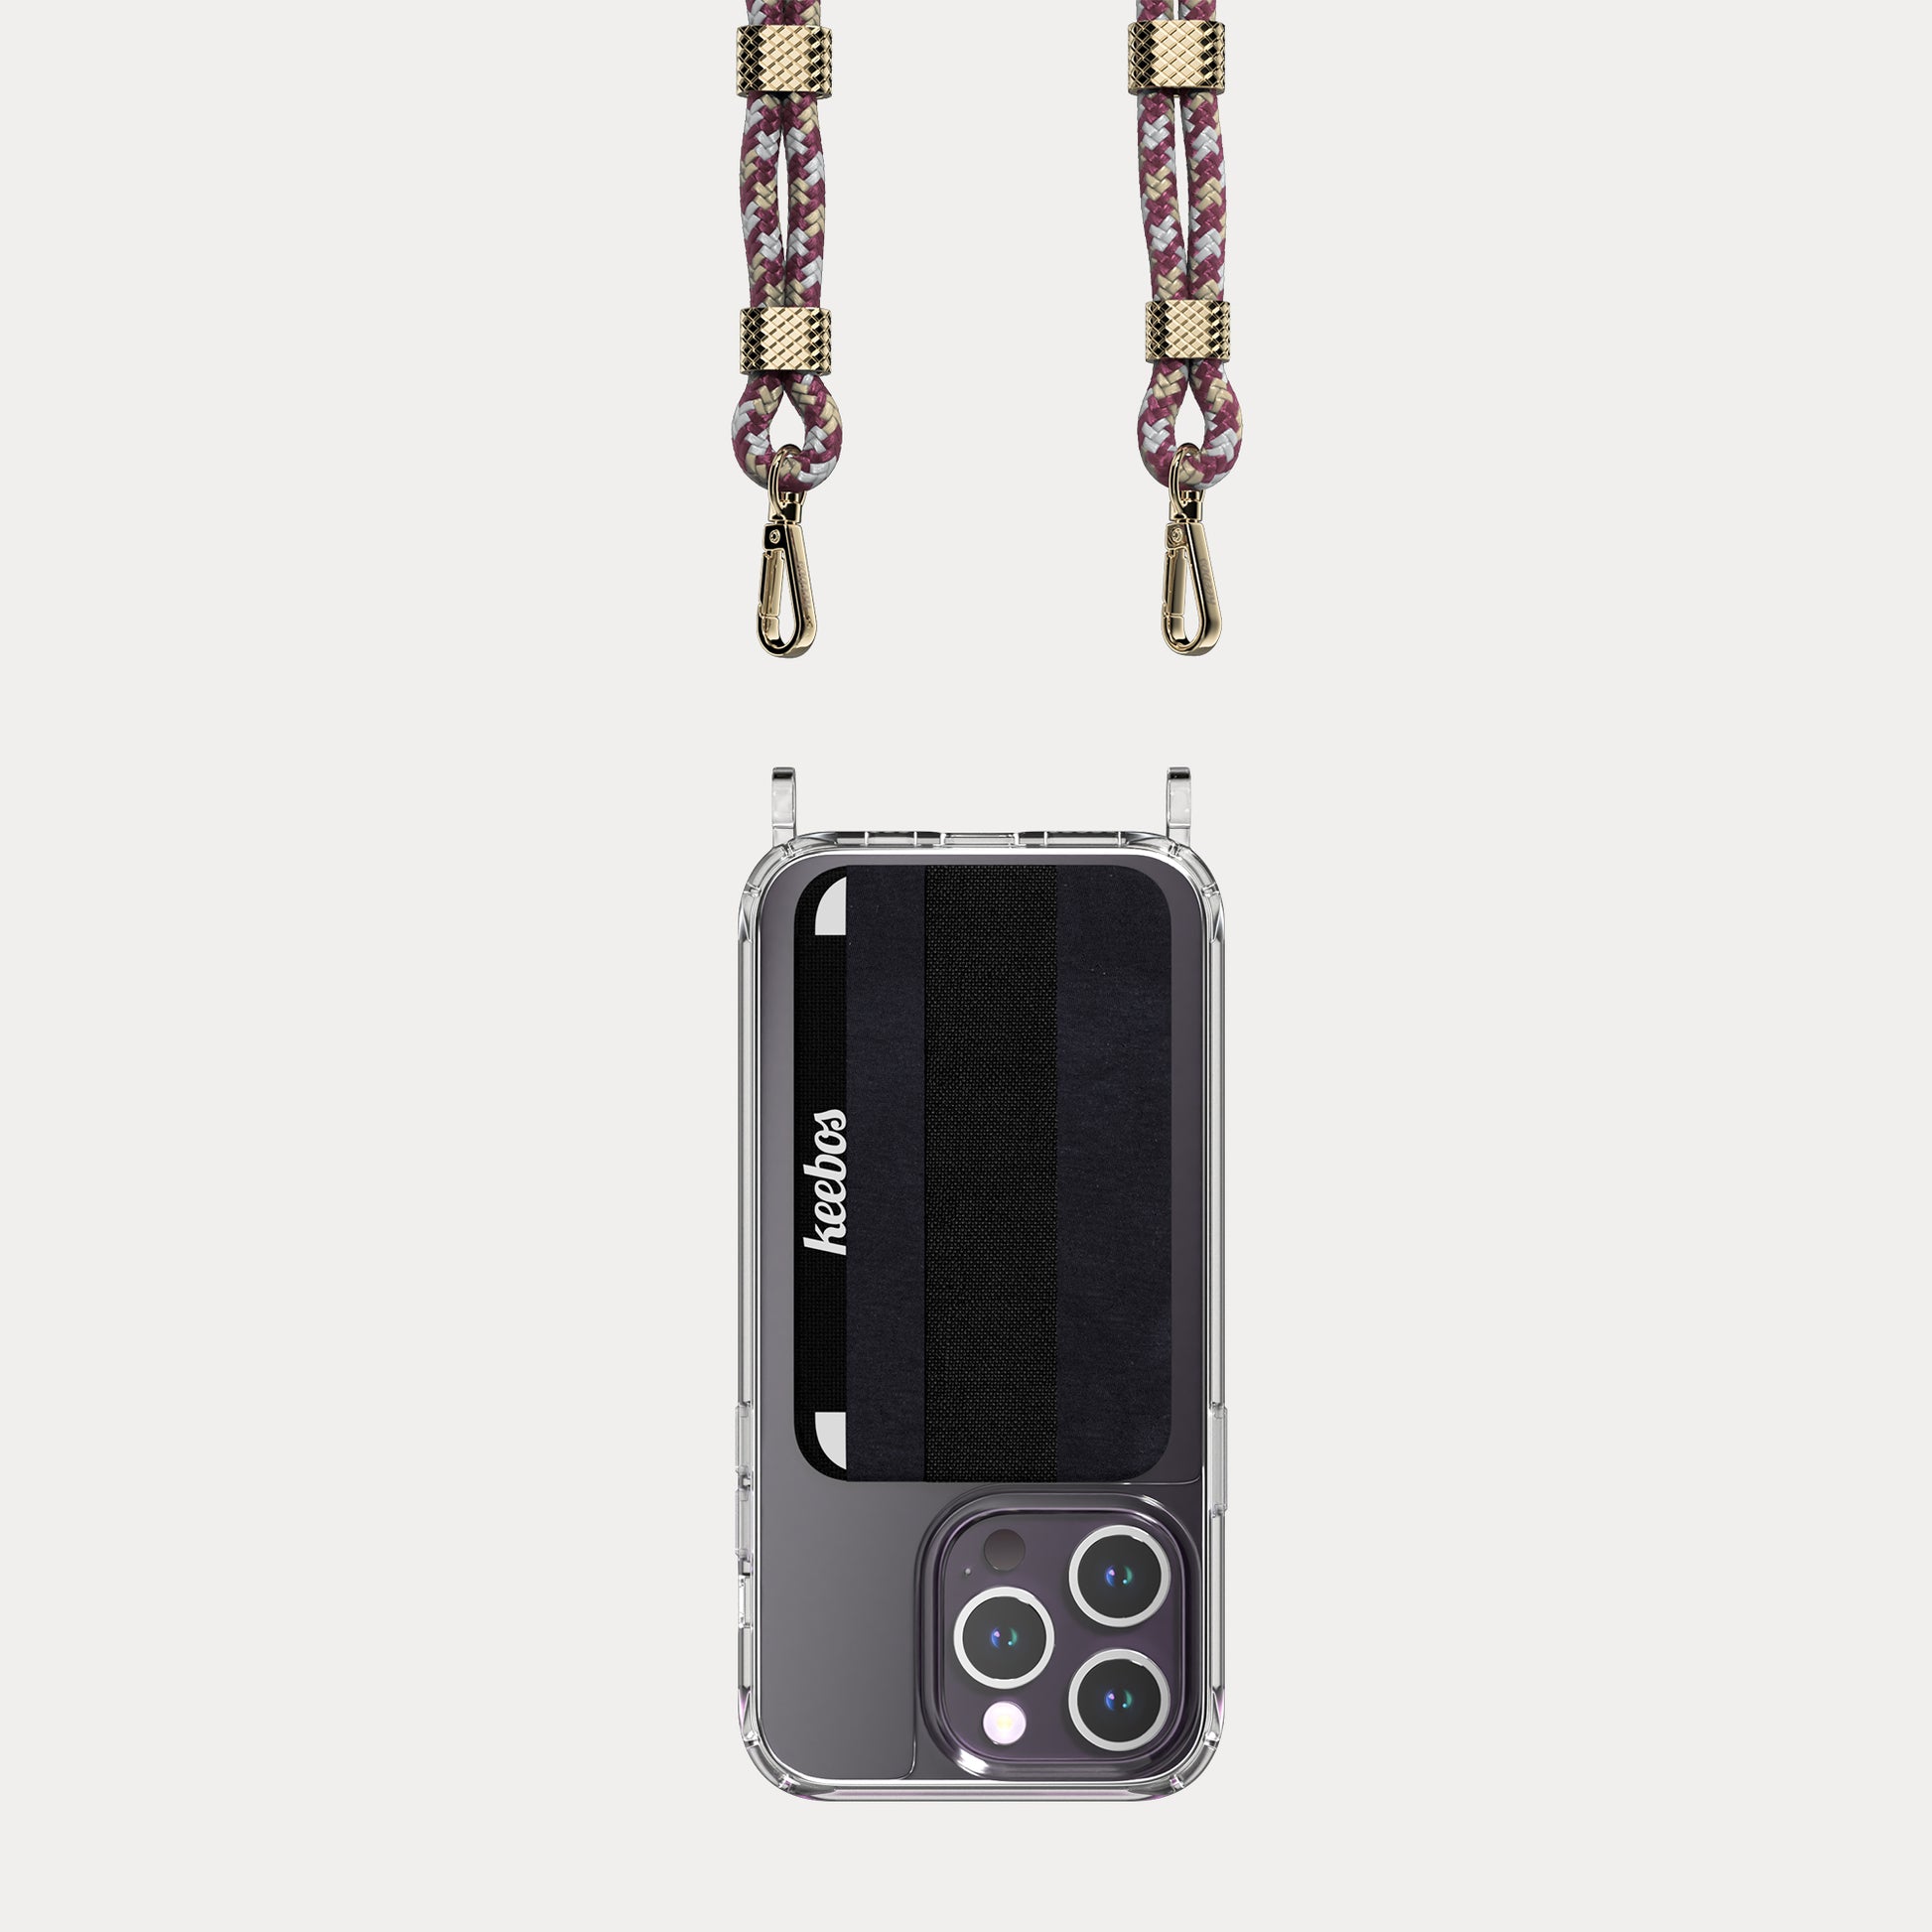 Crossbody Phone Case Necklace - Beach (Woven Red)